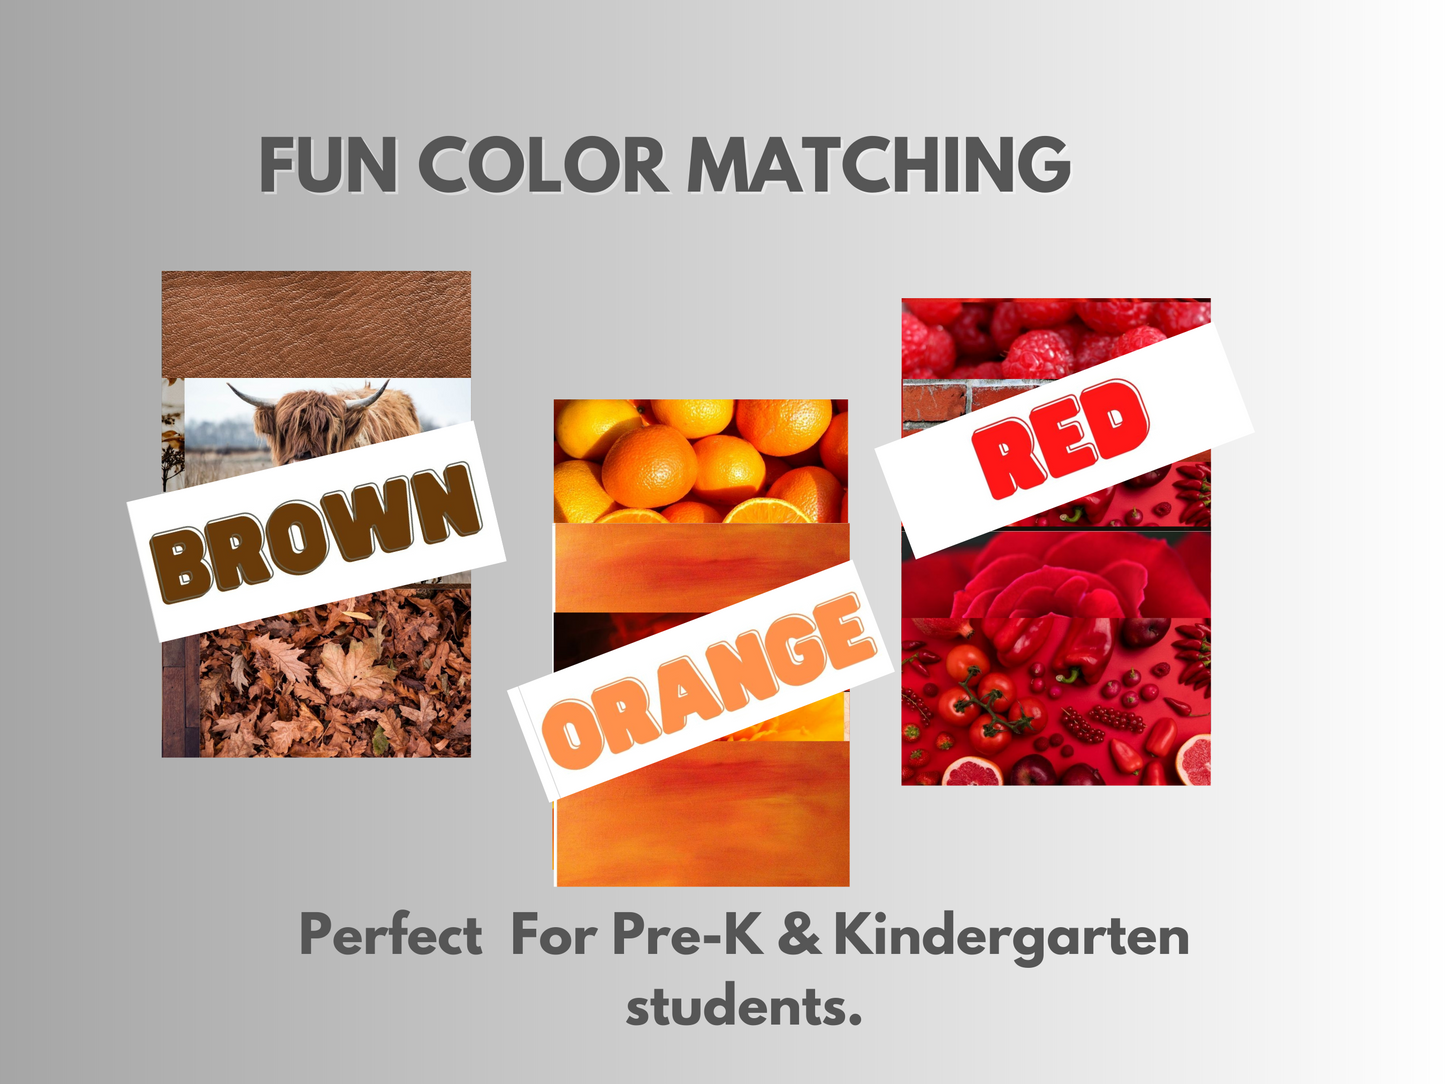 How to use the color matching activity.  Show pictures of the color brown, orange and red.